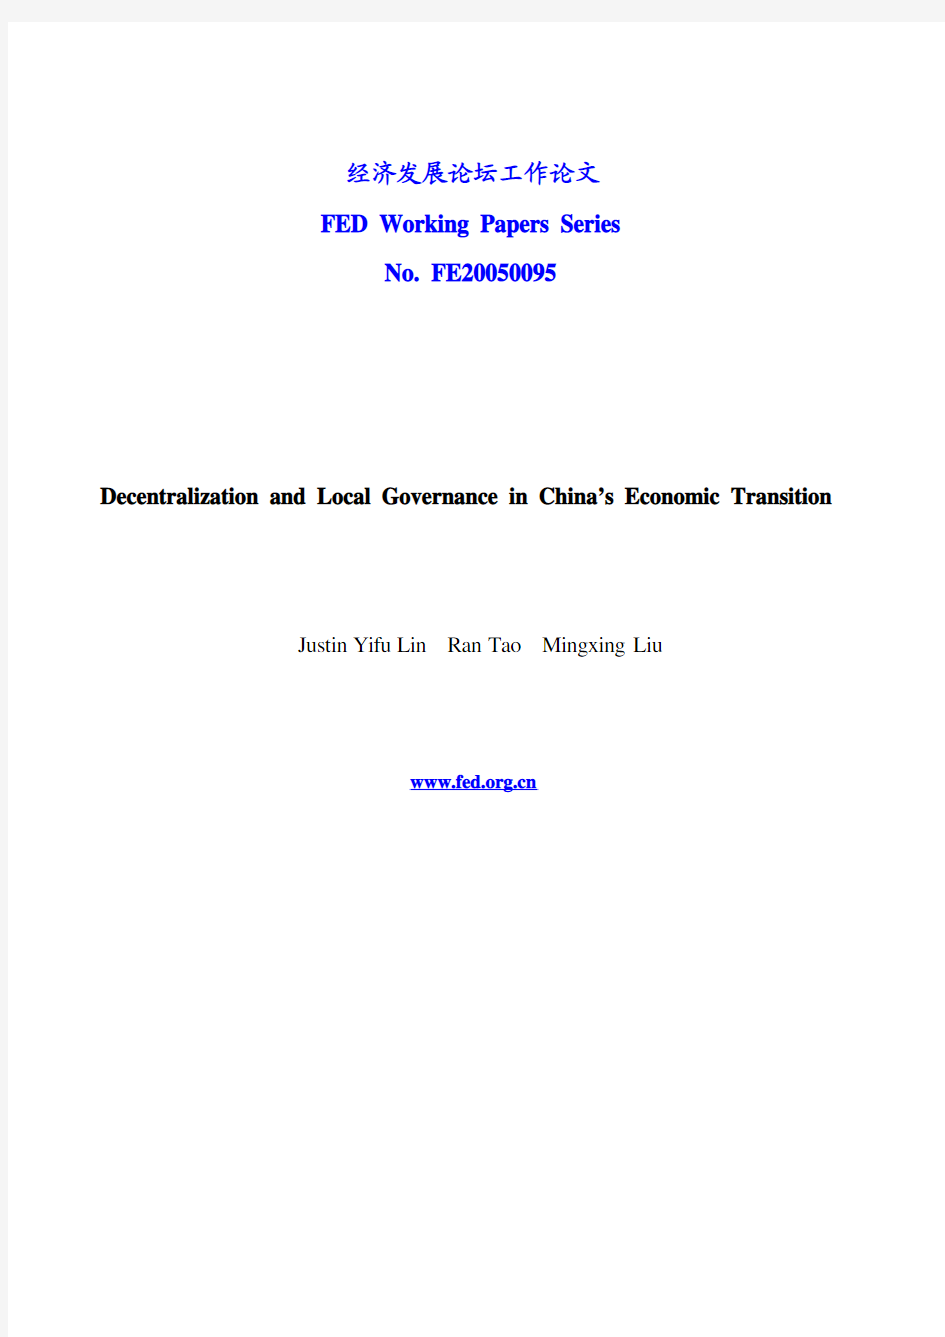 Decentralization and Local Governance in China’s Economic Transition